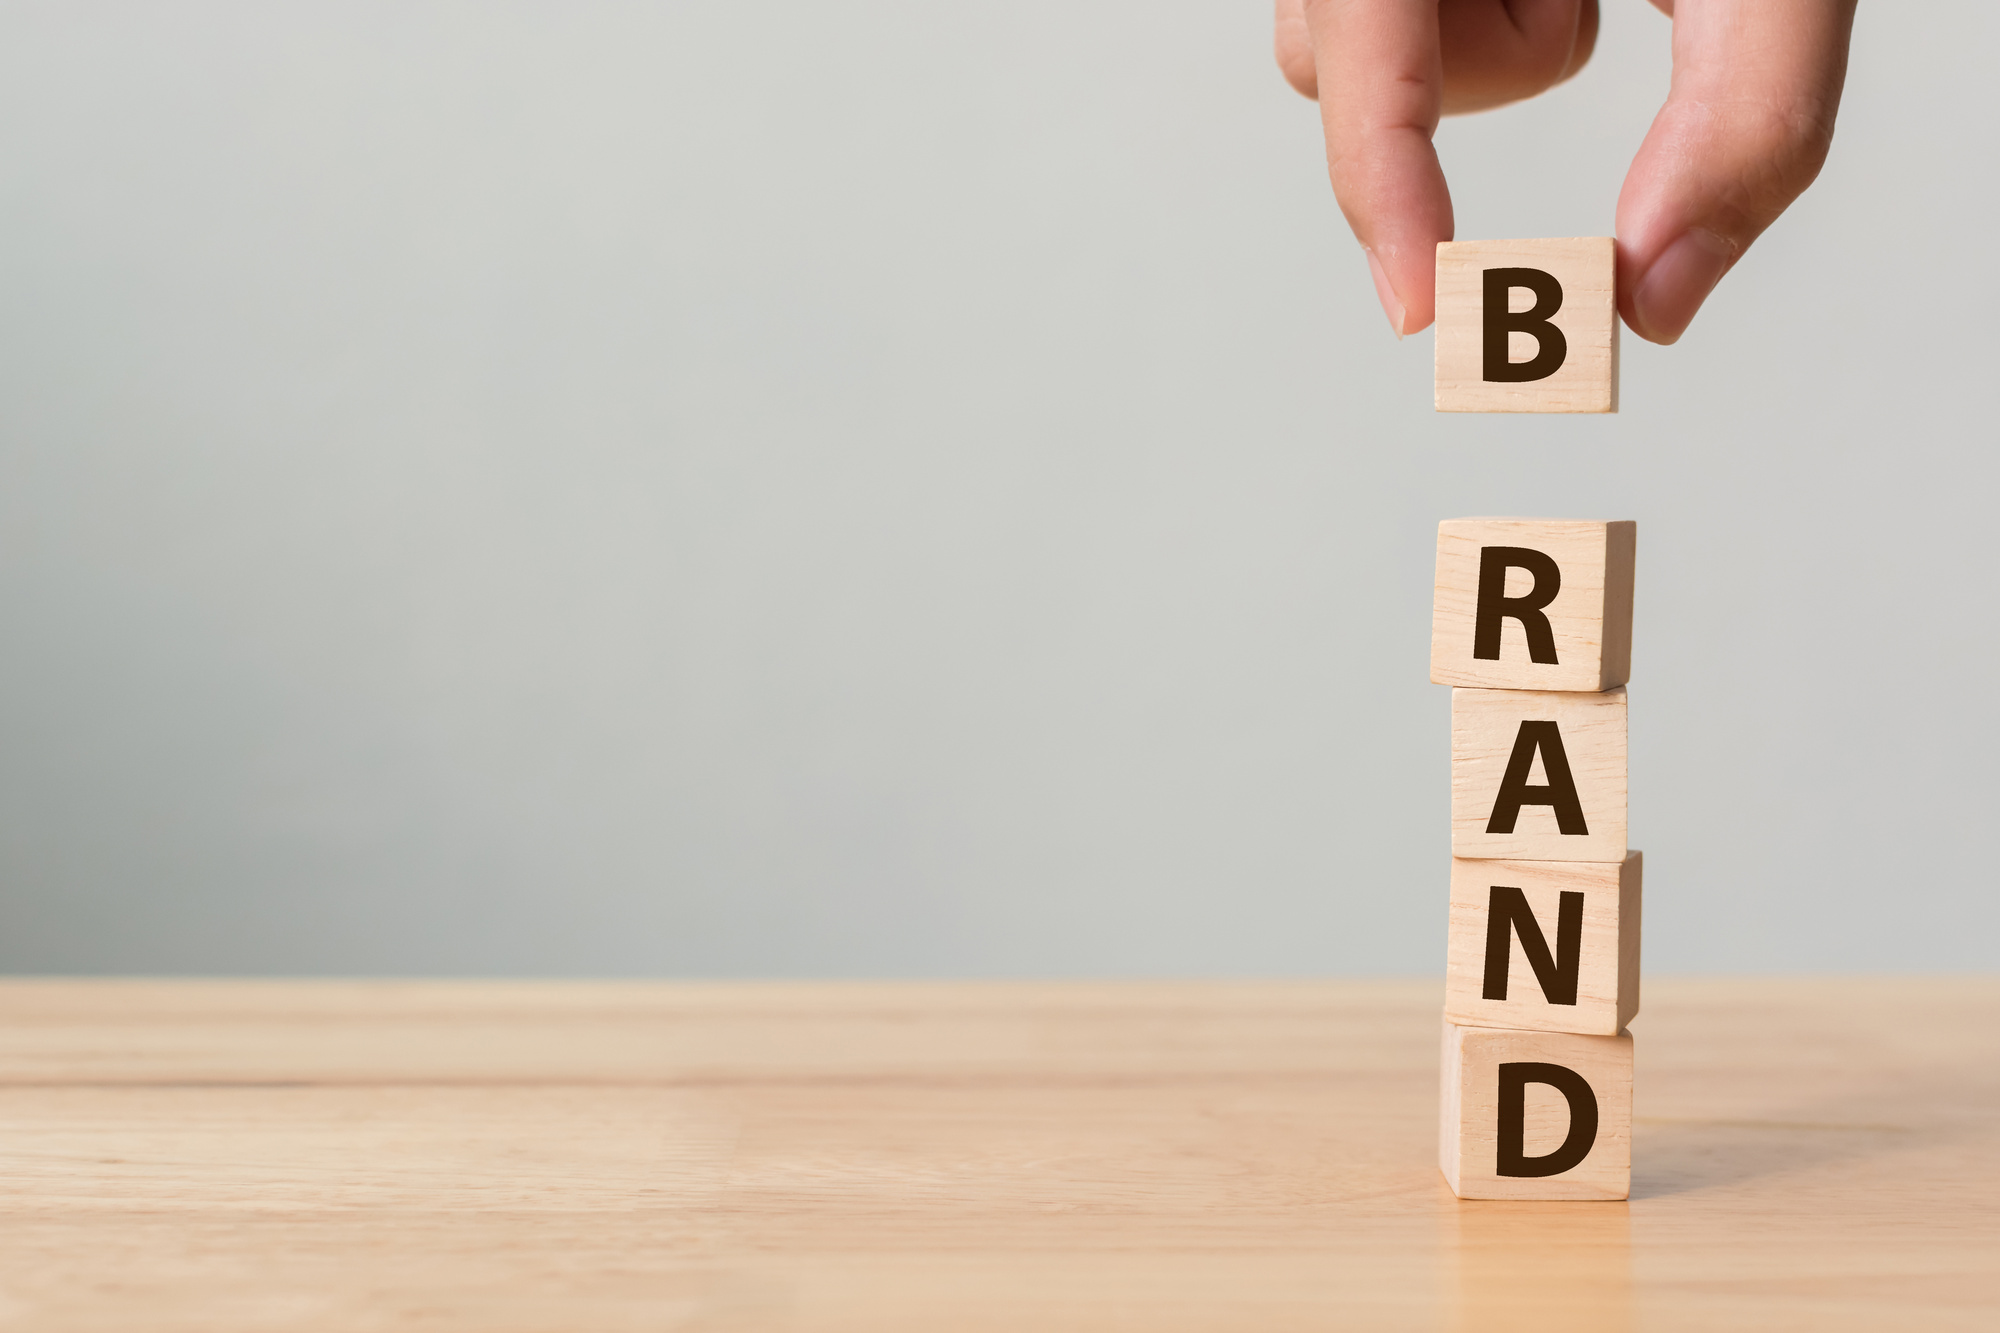 How To Build a Brand Identity That Drives Real Growth